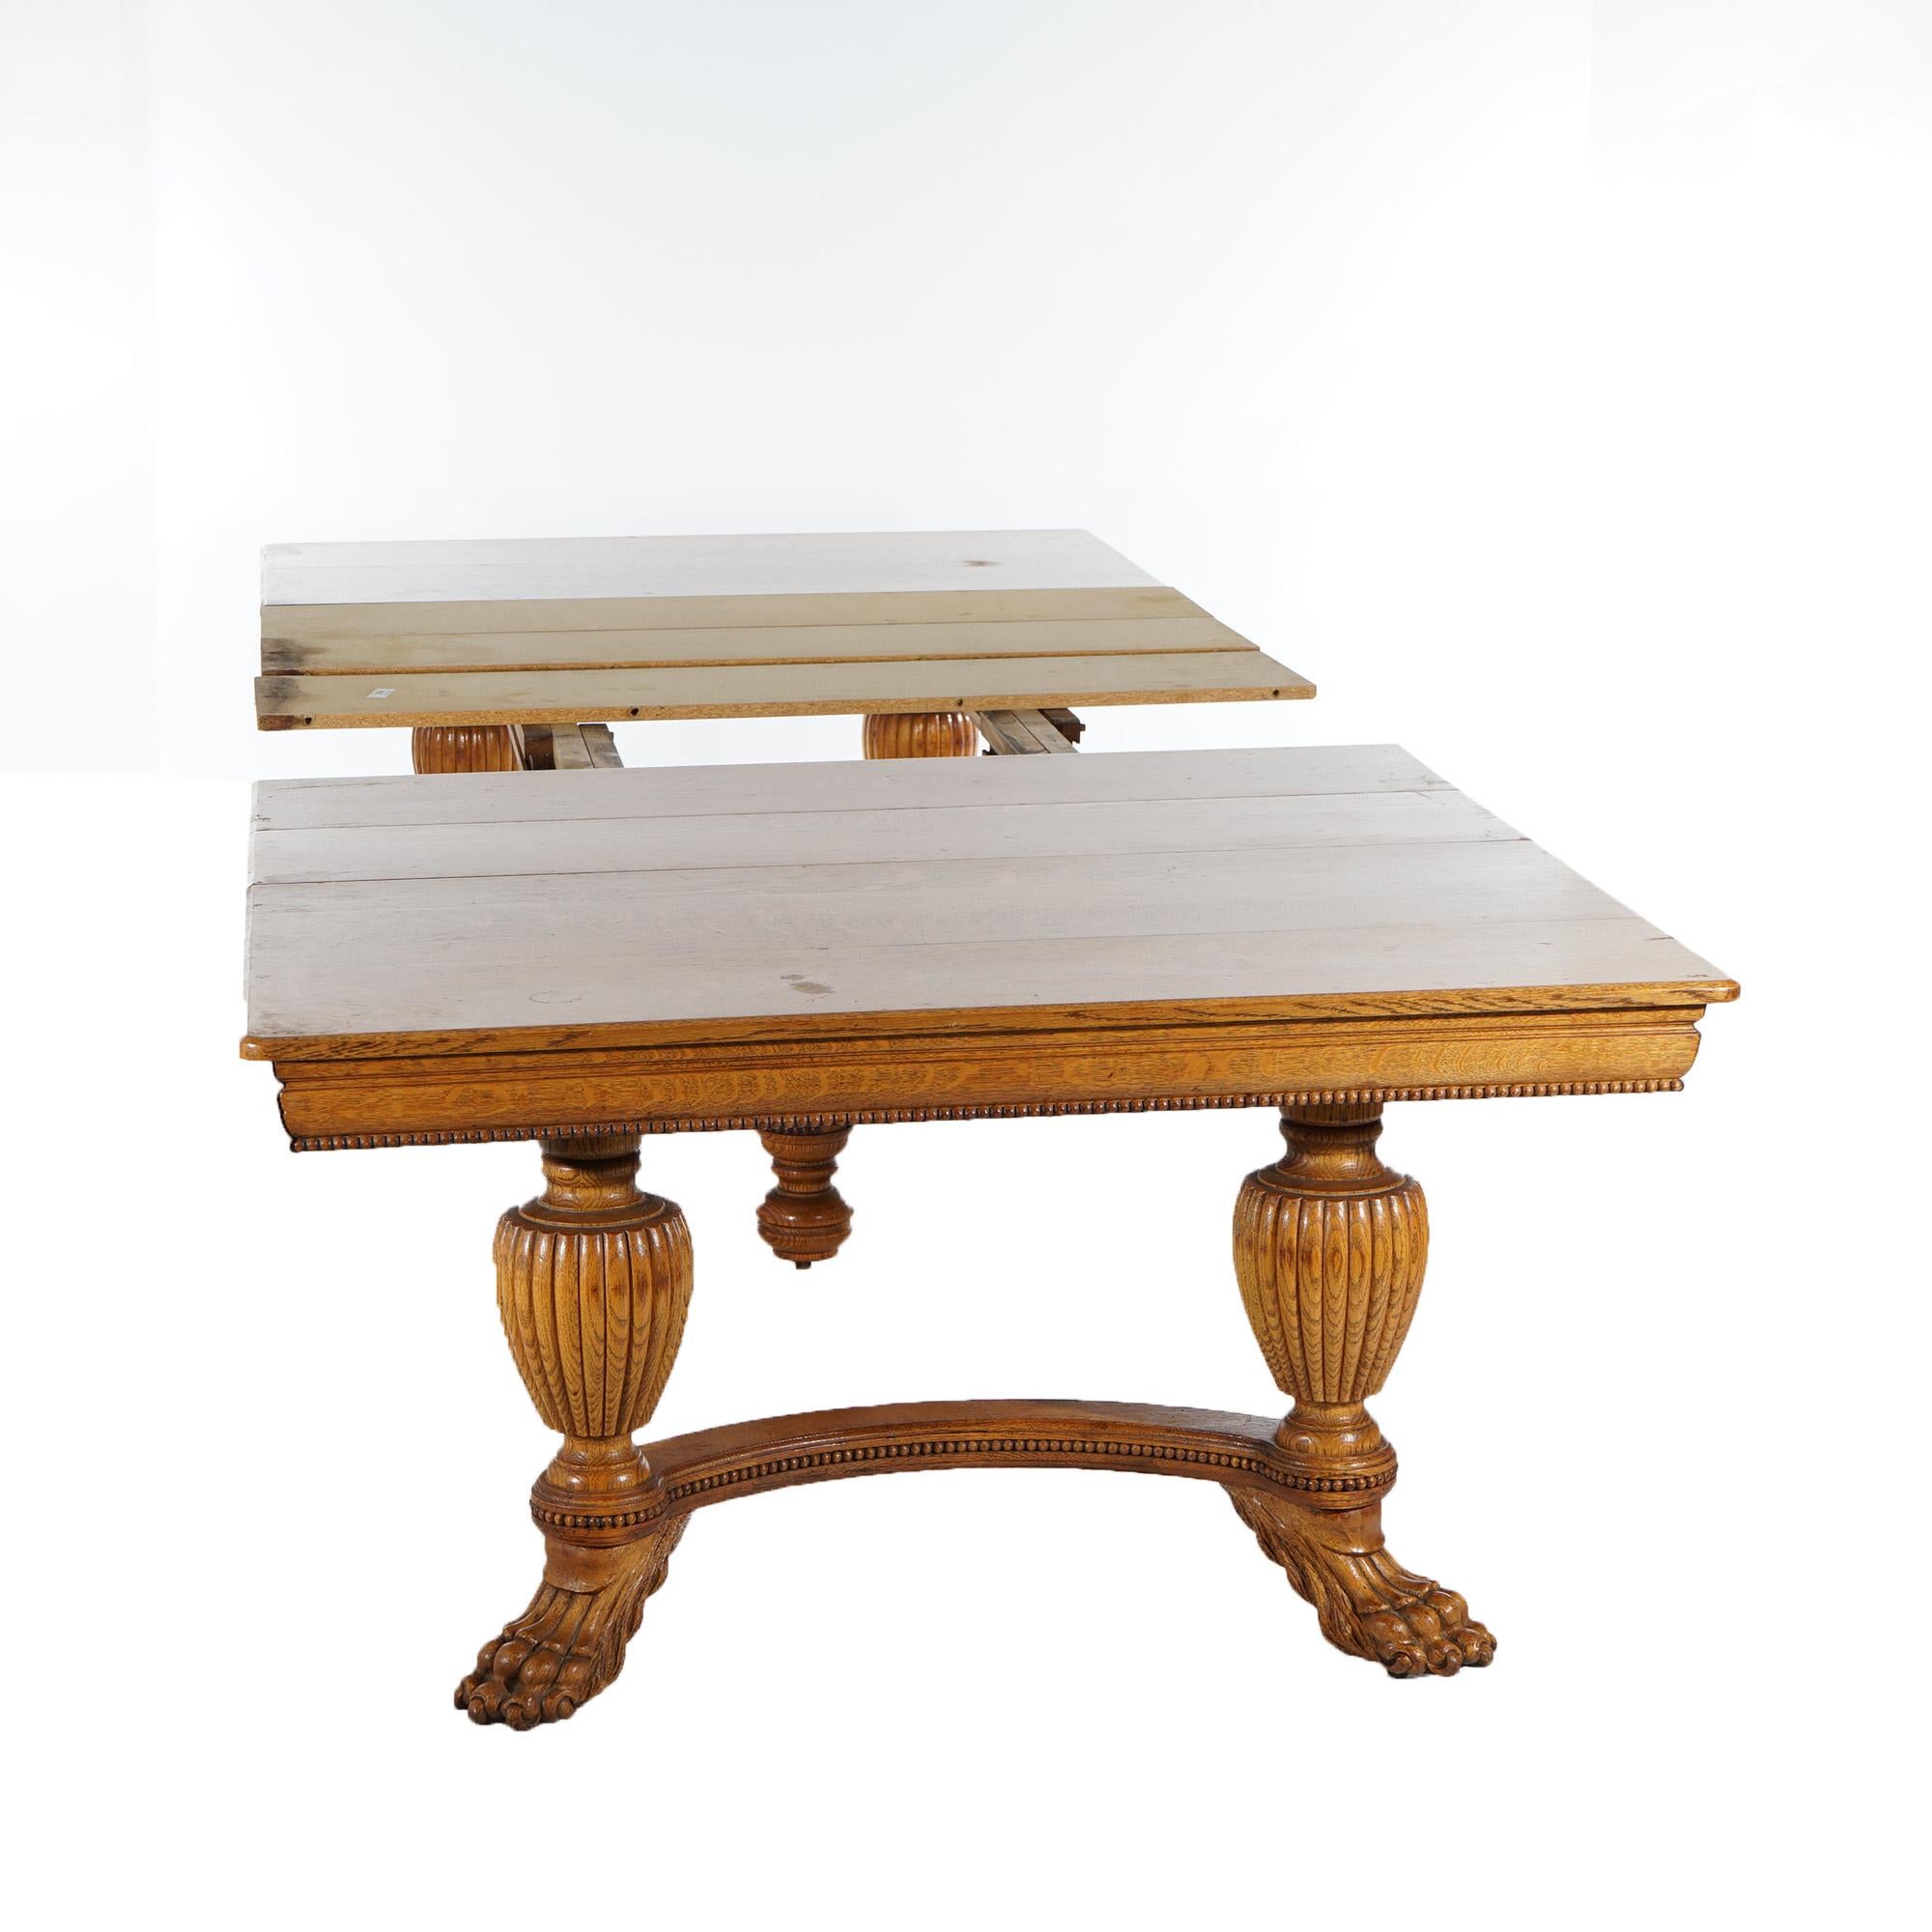 American Antique Square Quarter Sawn Oak Dining Table with Five Leaves & Claw Feet c1900